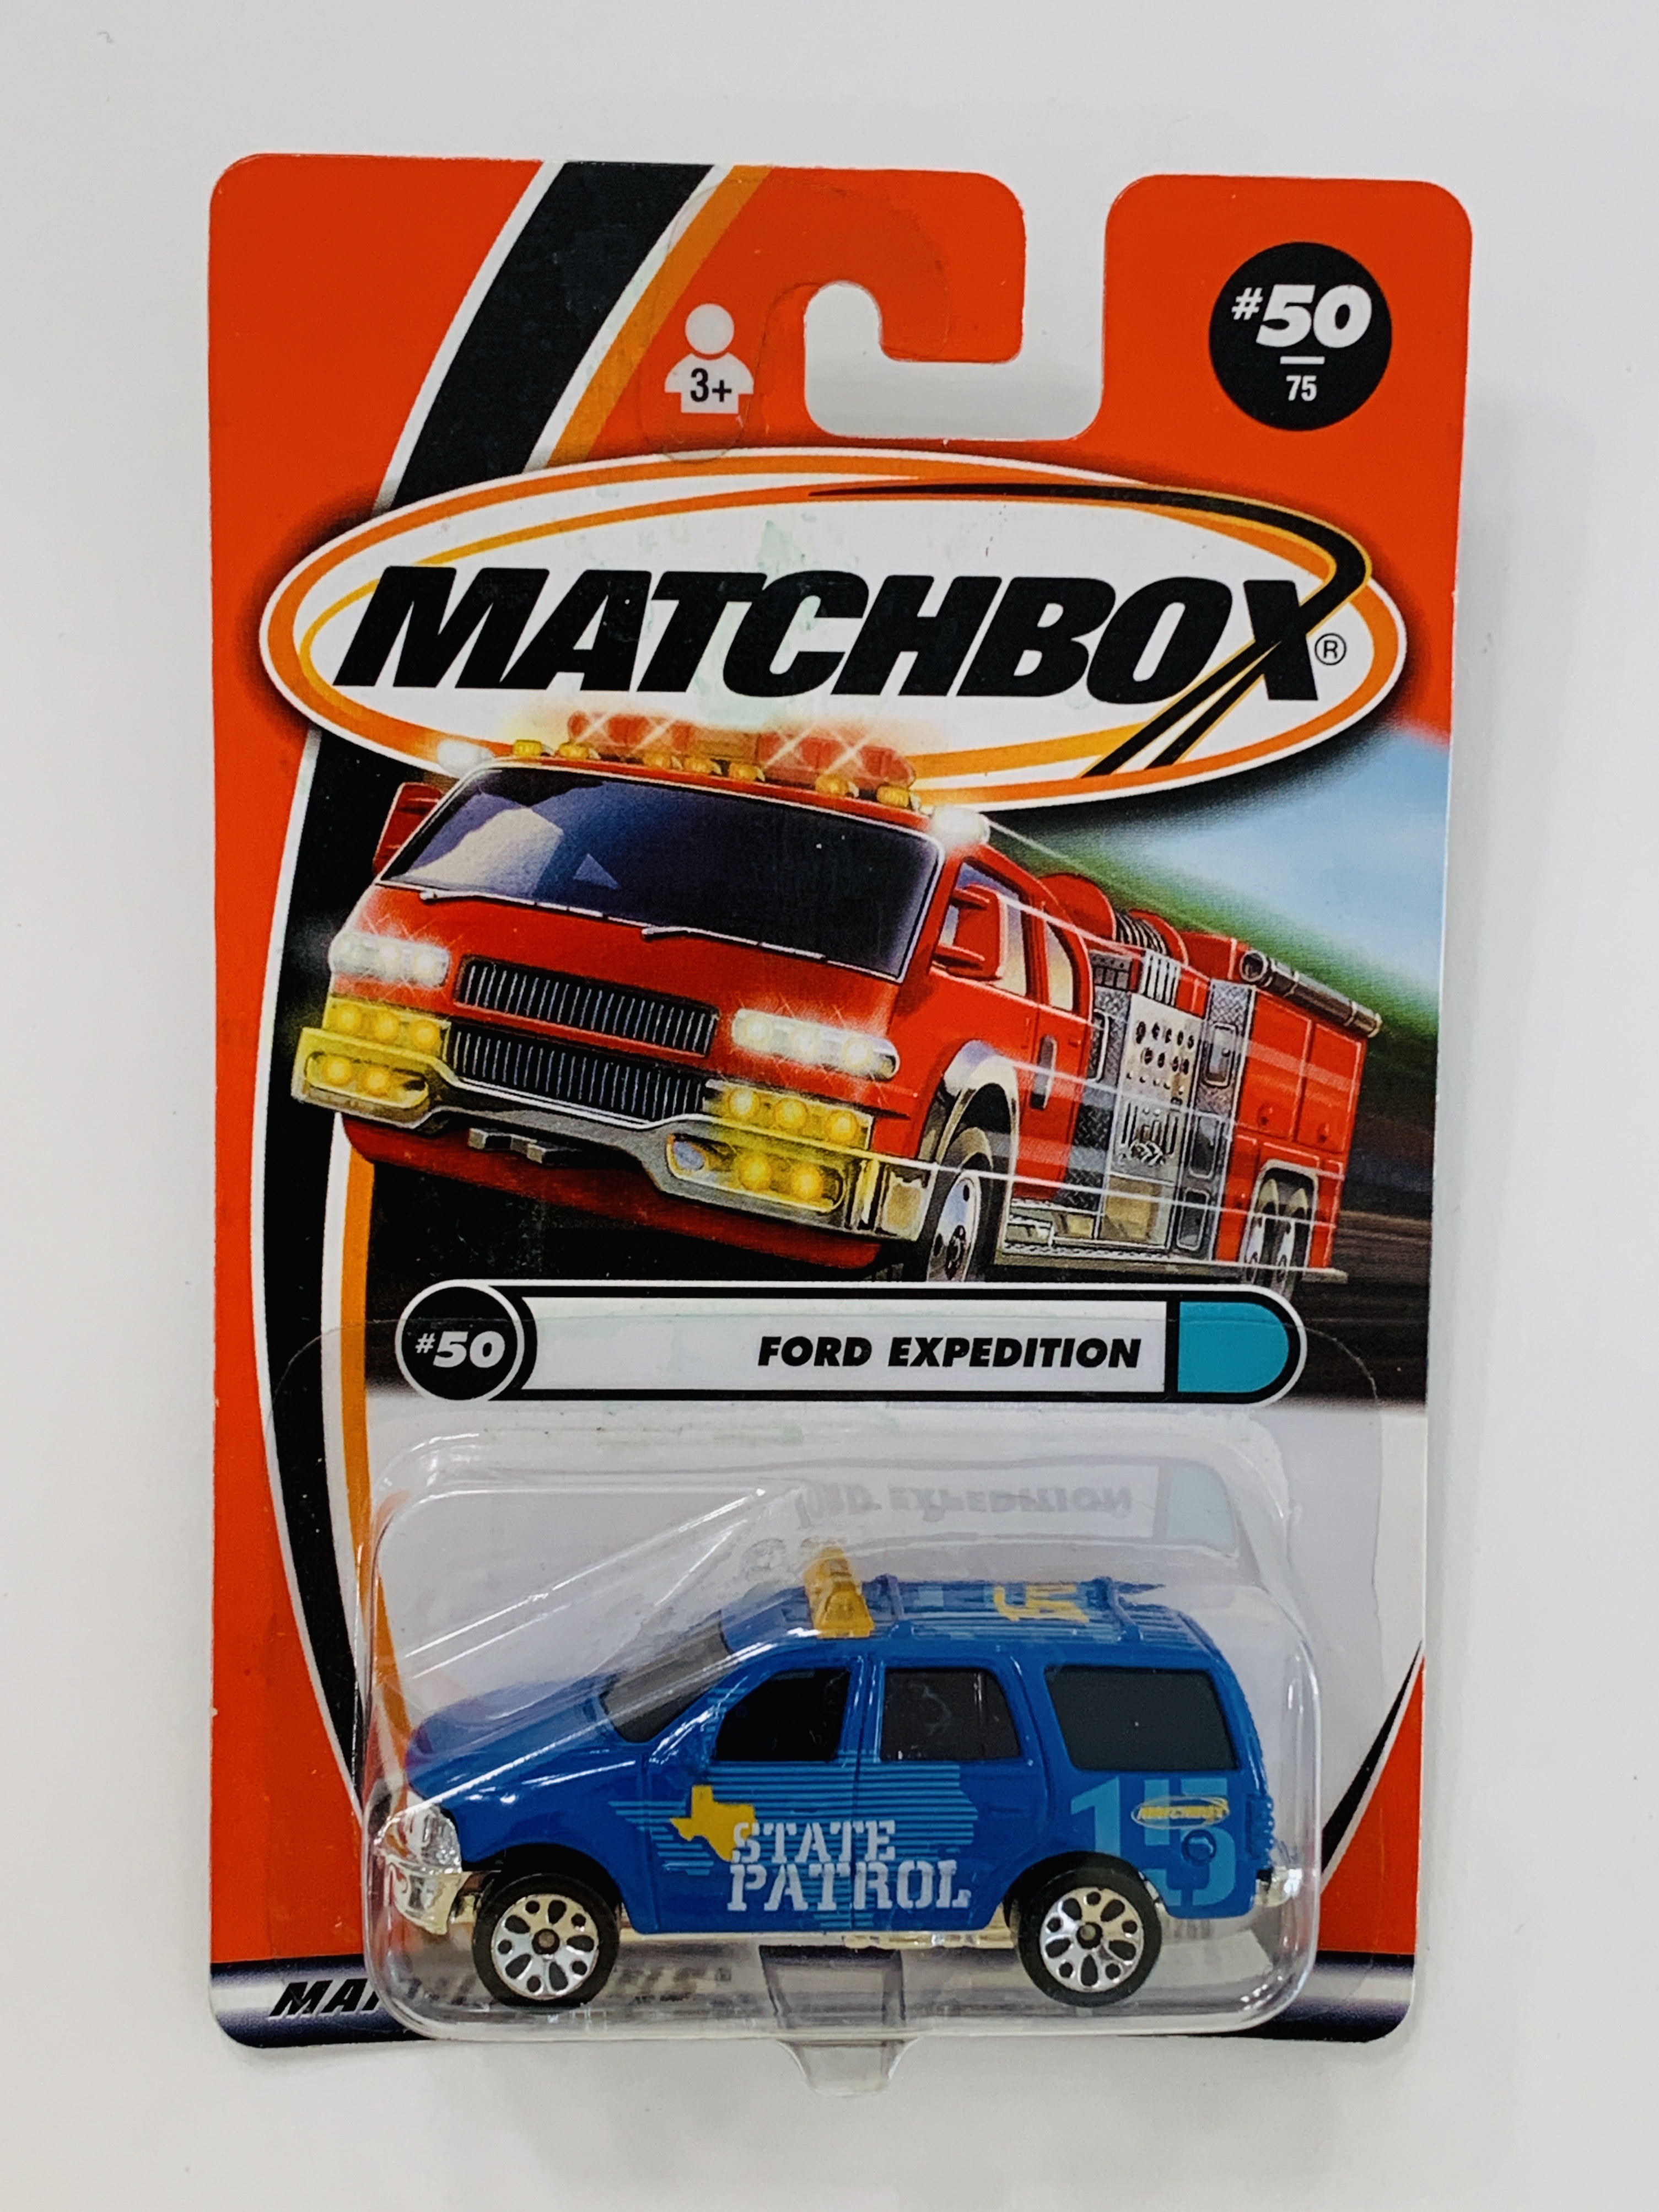 Matchbox #50 Ford Expedition